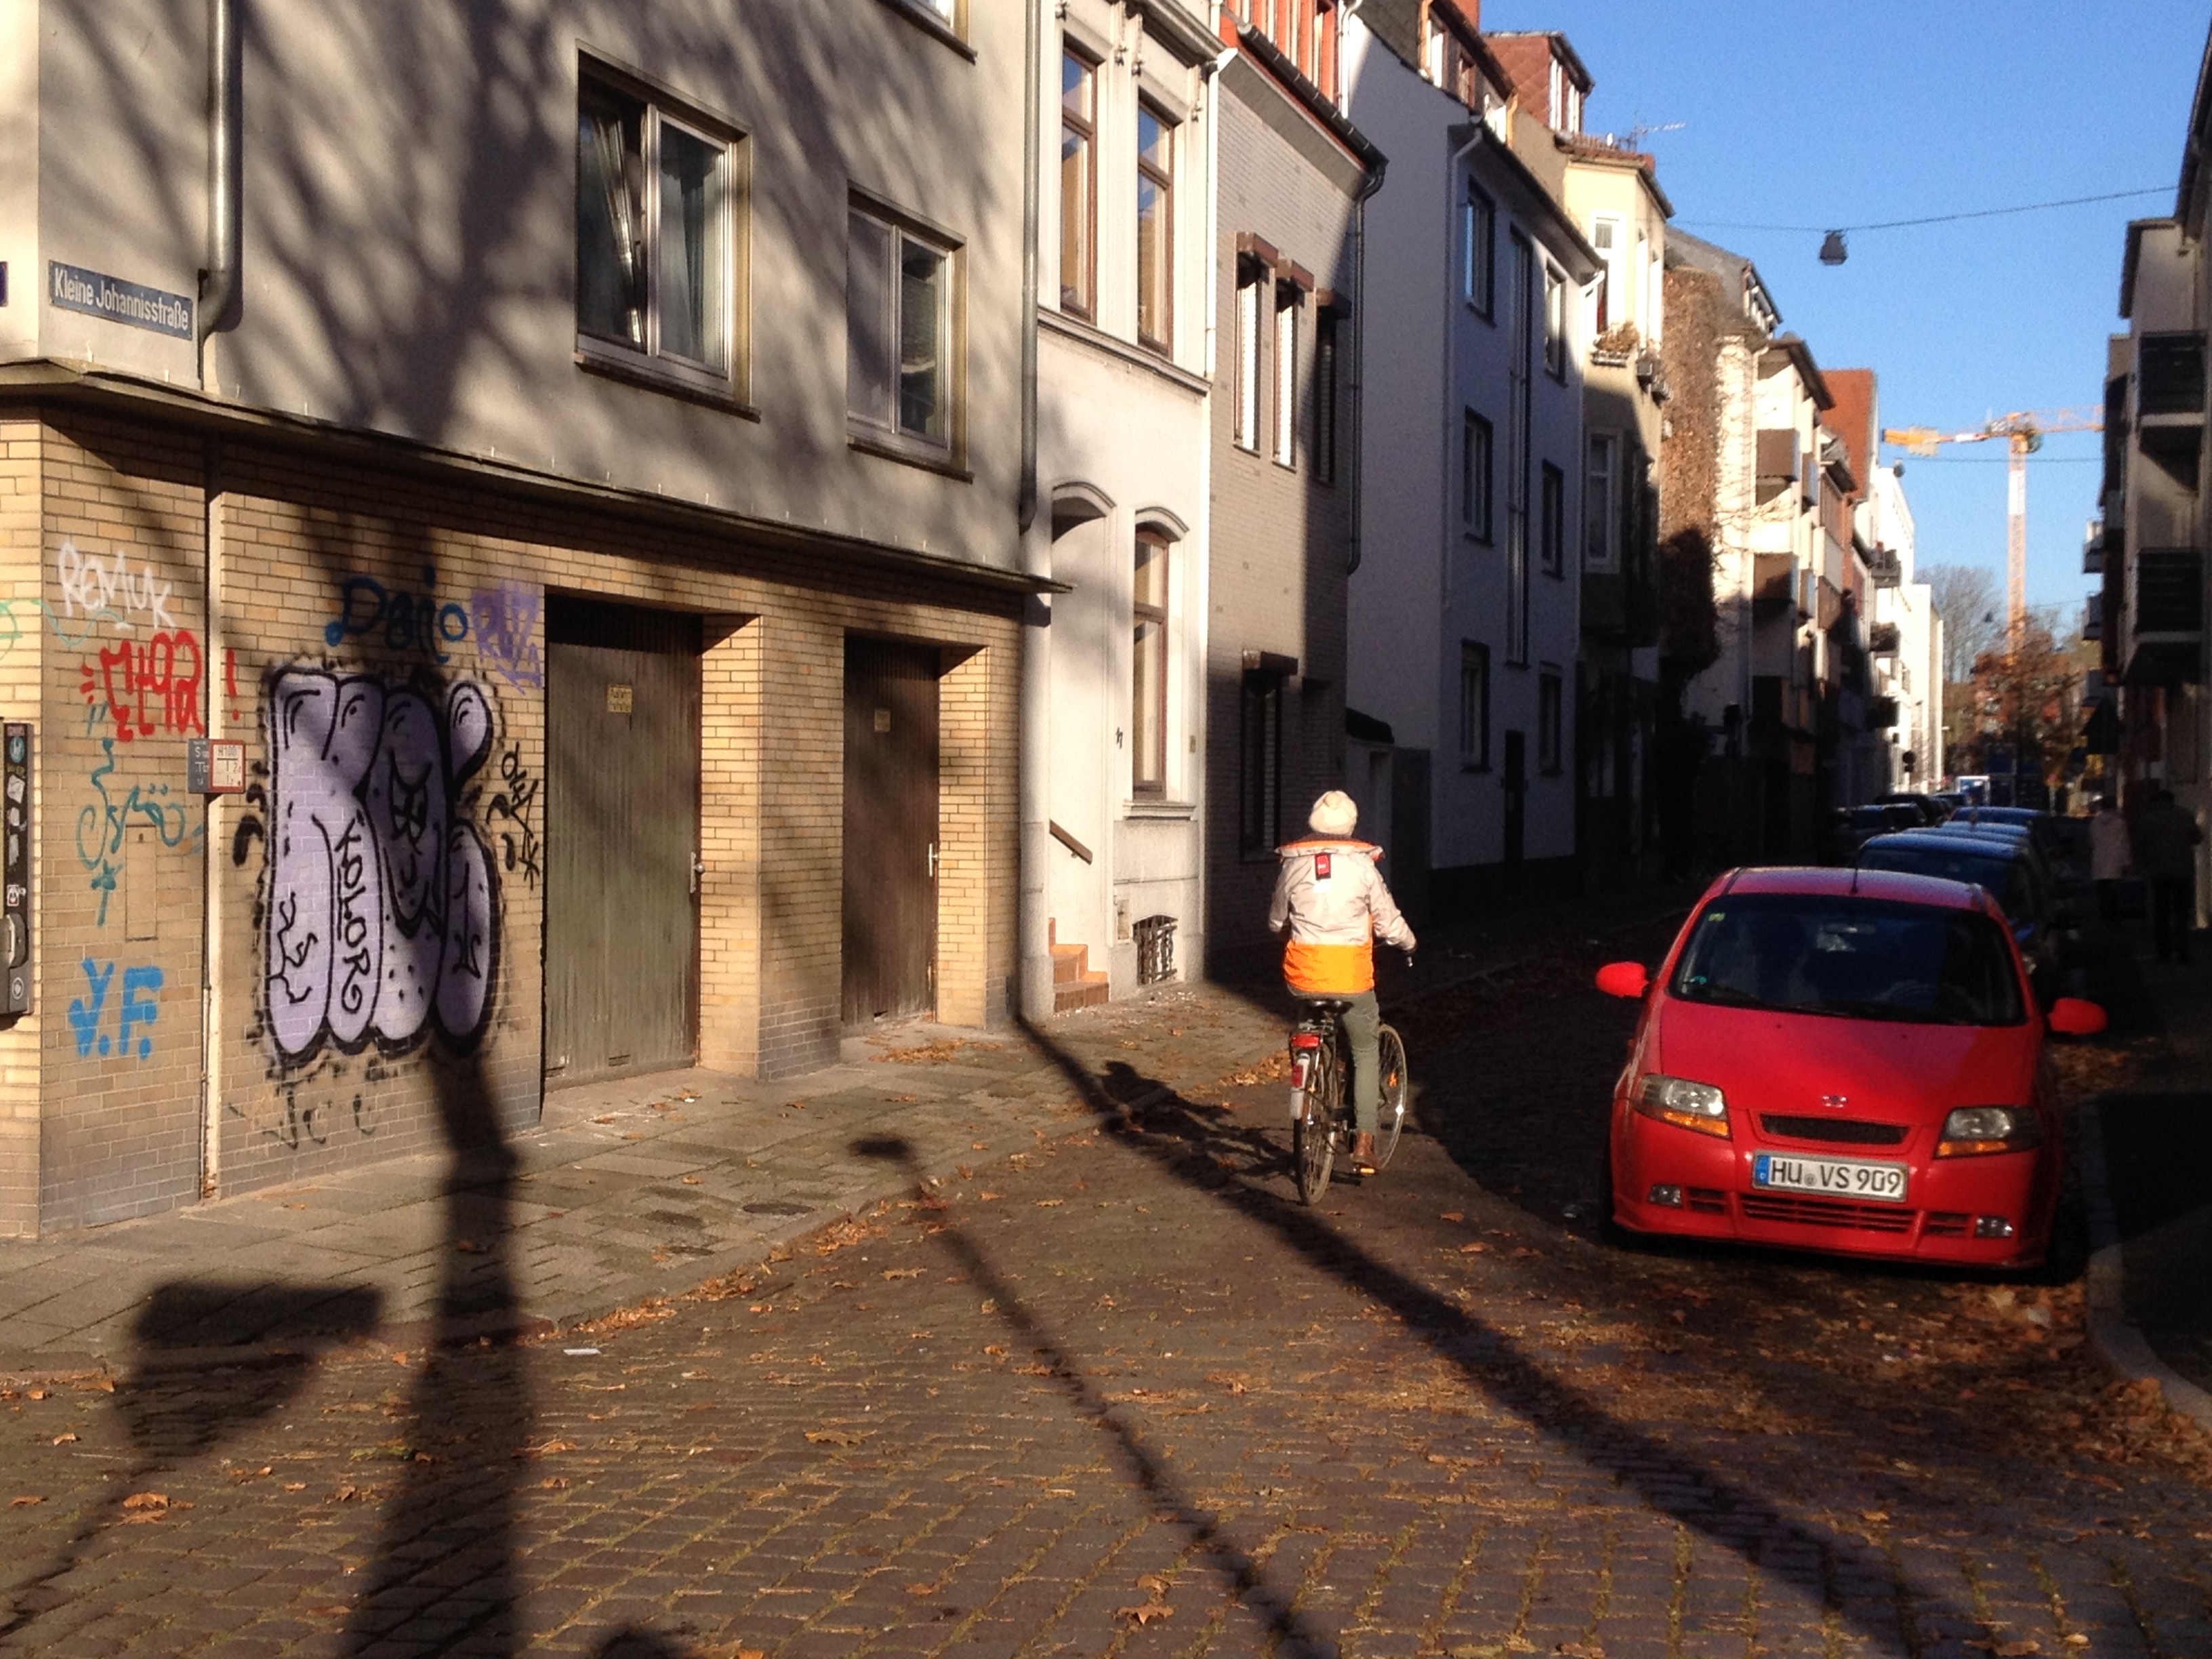 Kleine Johannisstrasse: One of the more uncomfortable streets for cycling